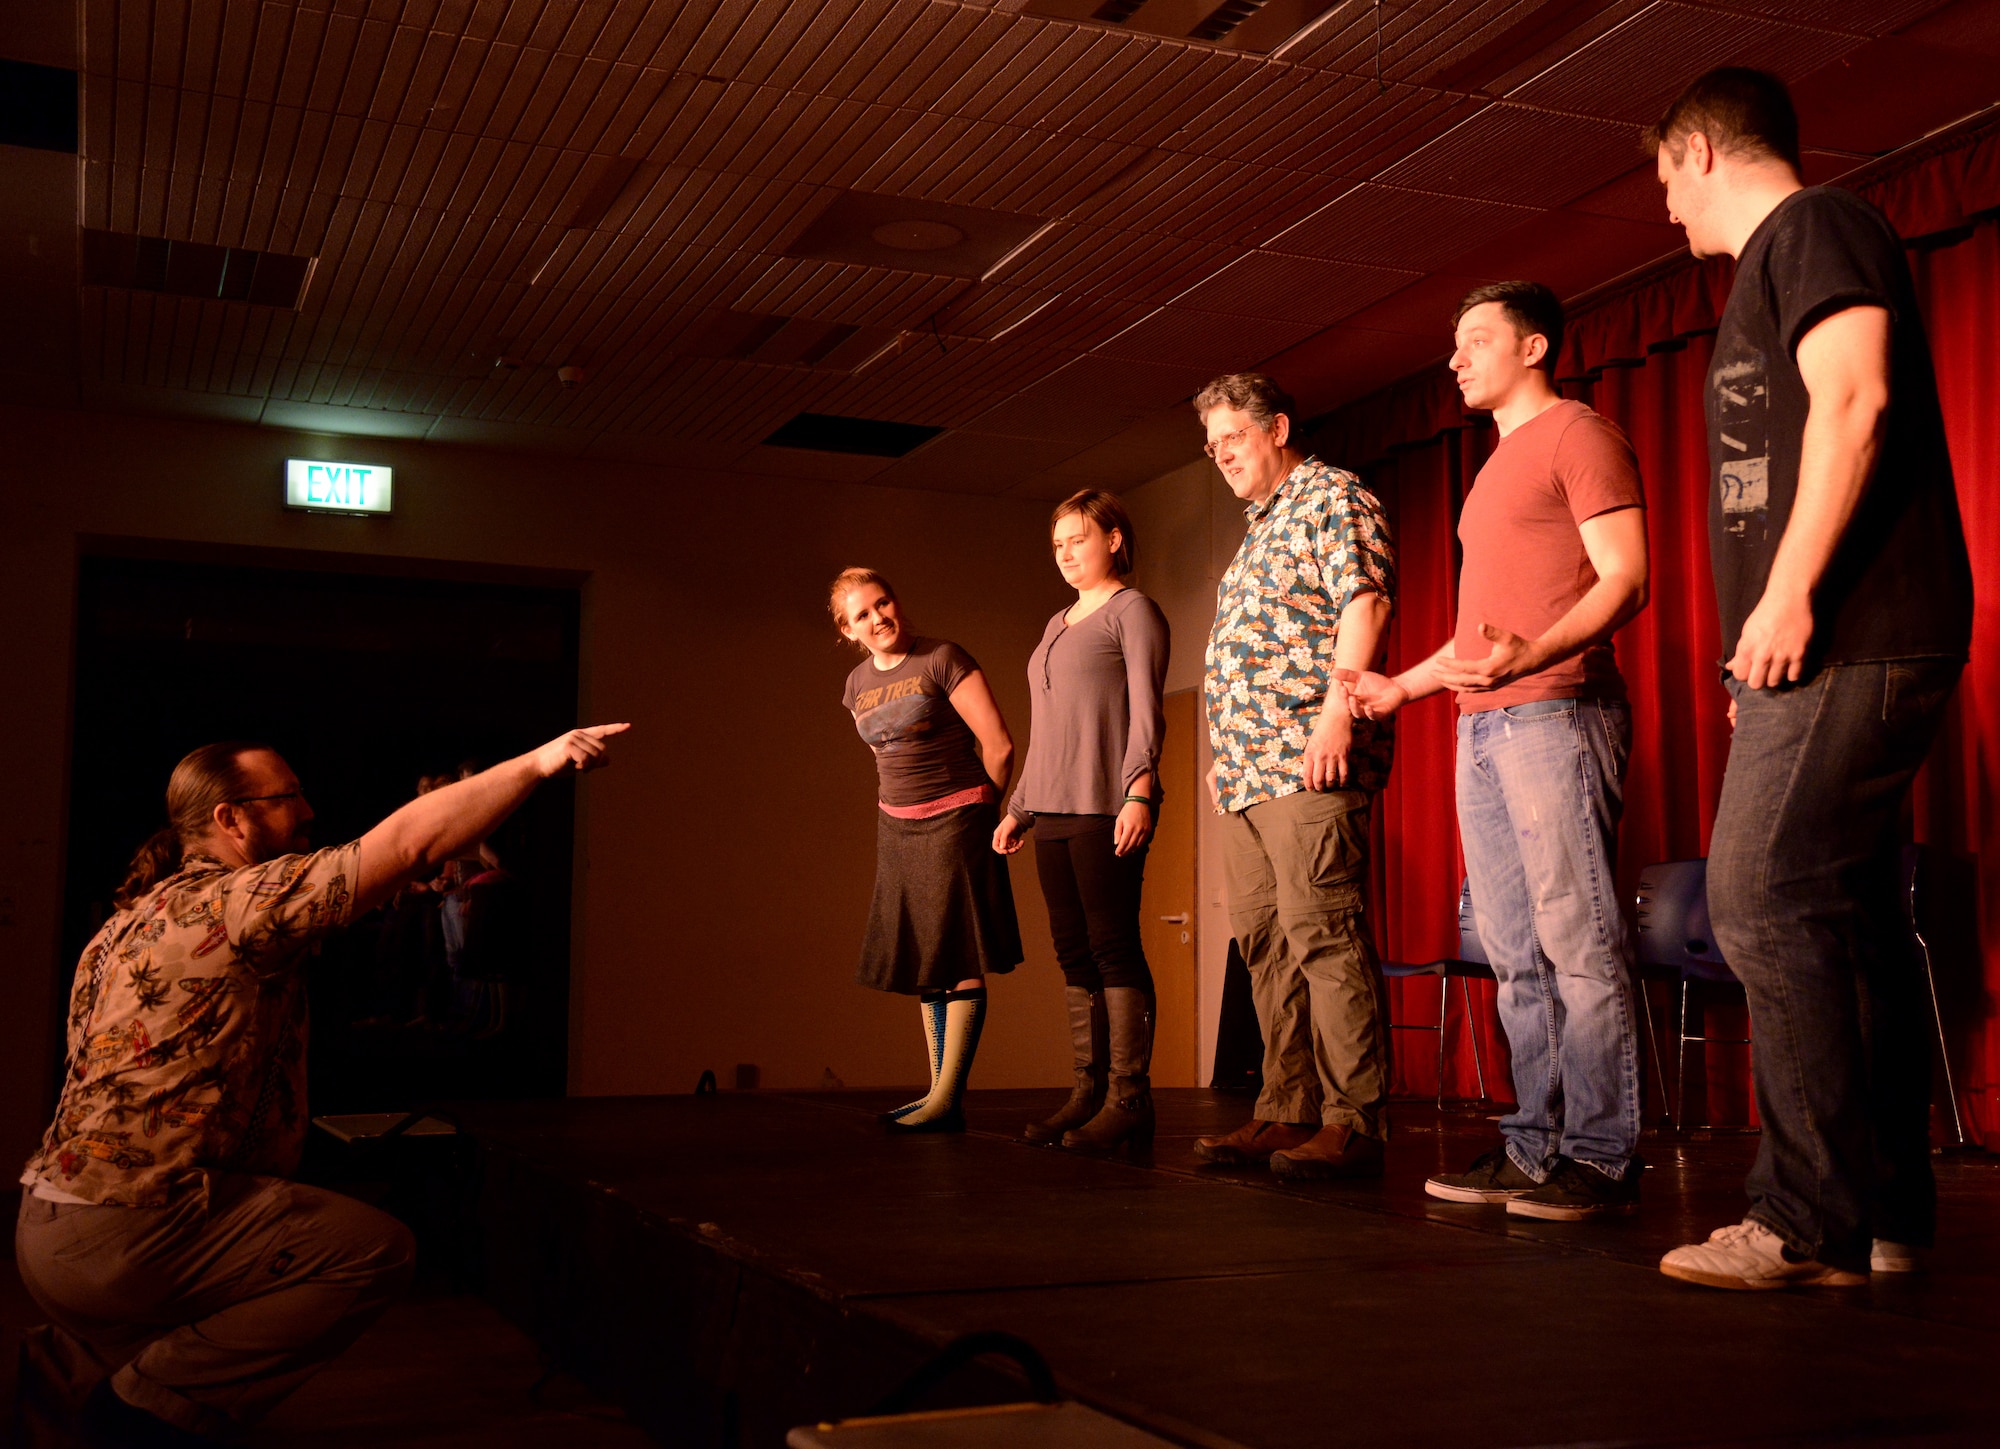 Edison Ruland, 86th Force Support Squadron recreation specialist, directs members of Strike Force Comedy during “New Year Nuttiness” at Ramstein Air Base, Germany, Jan. 24, 2015. Strike Force Comedy is an improv club comprised of members of the Kaiserslautern Military Community. (U.S. Air Force photo/Senior Airman Timothy Moore)